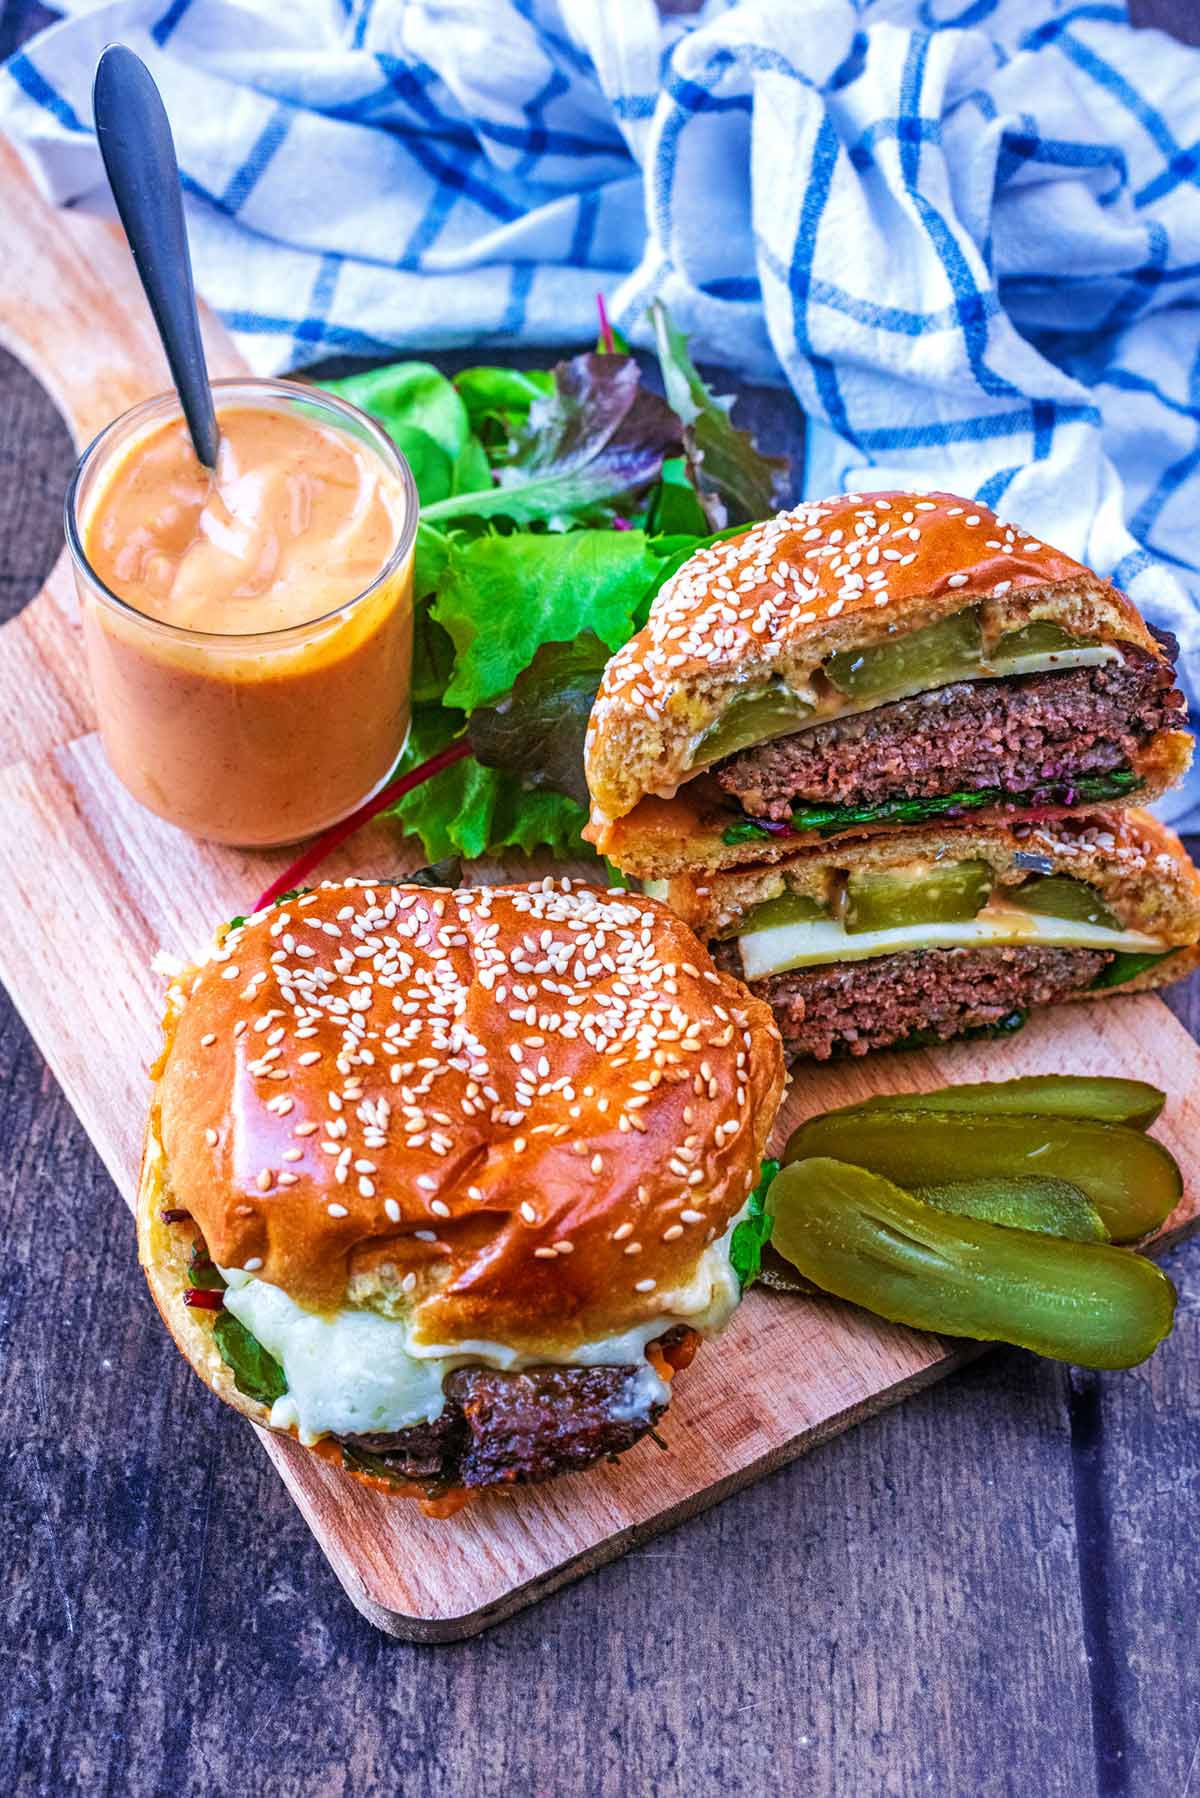 Two hamburgers on a wooden board, one is cut in half.